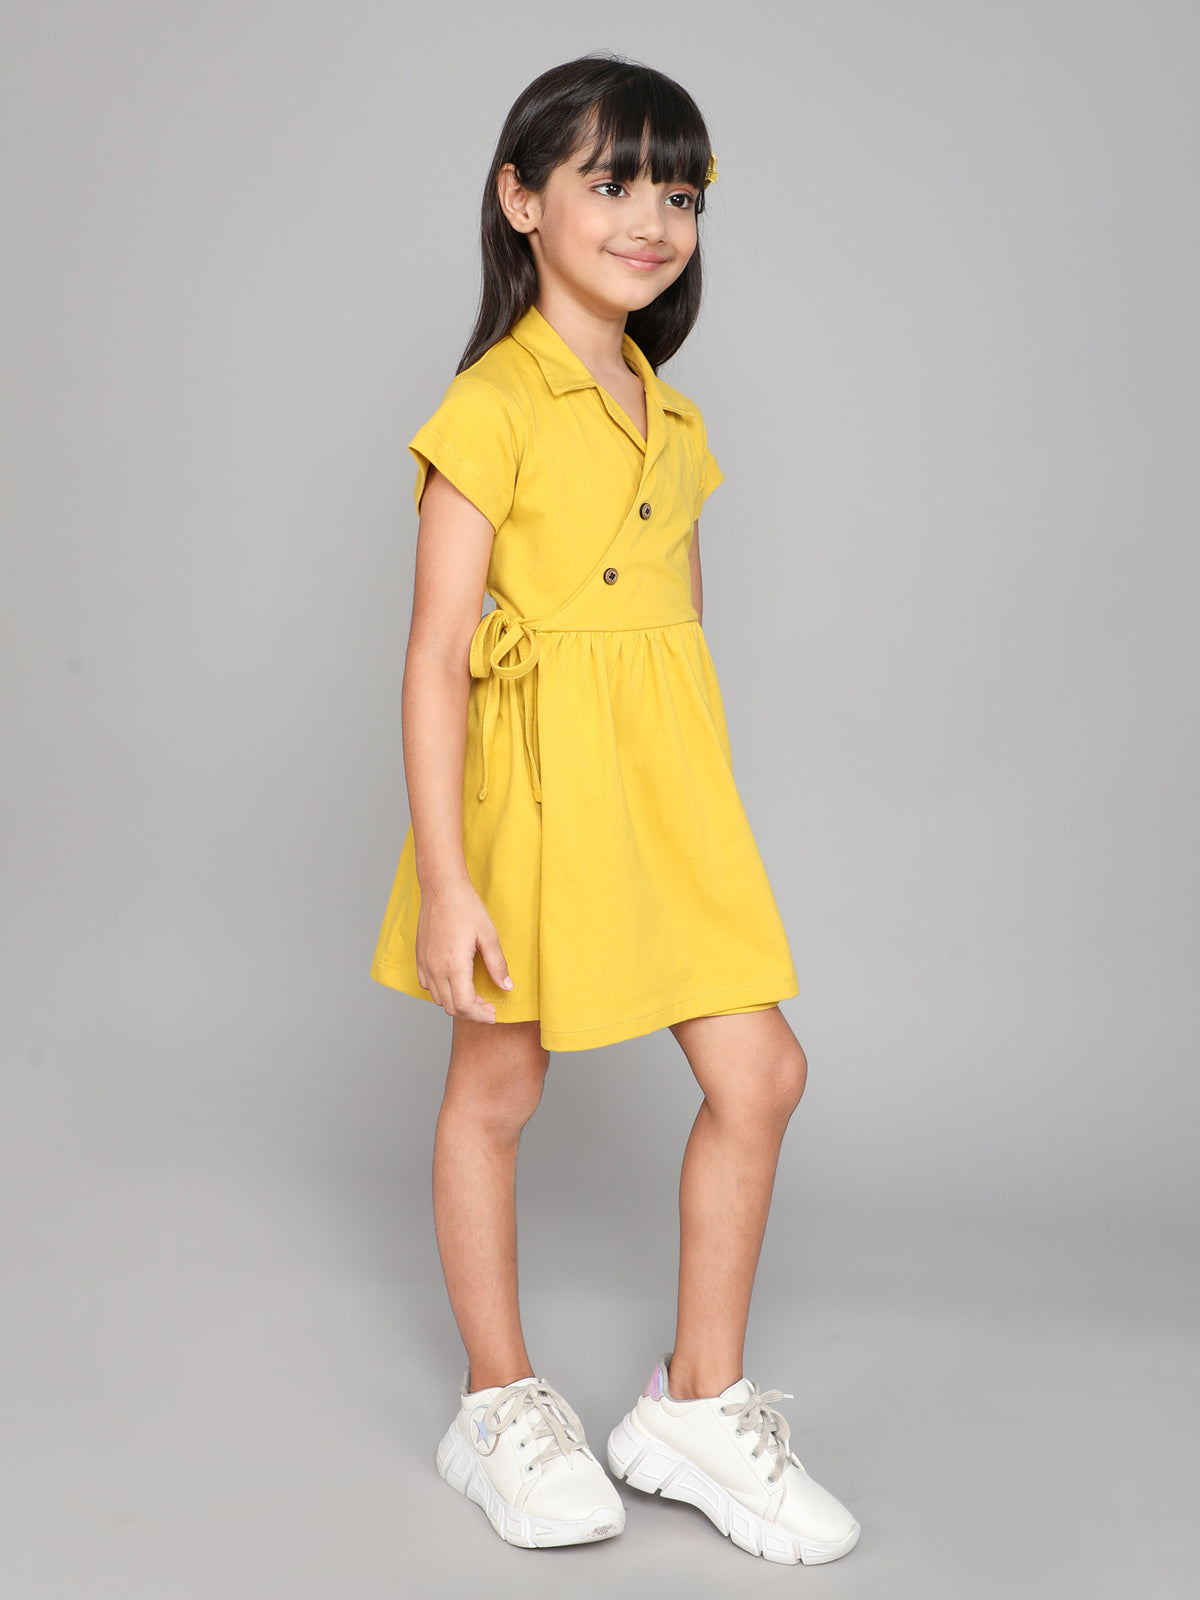 Collared Pure Cotton Tie Knot Dress for Girls